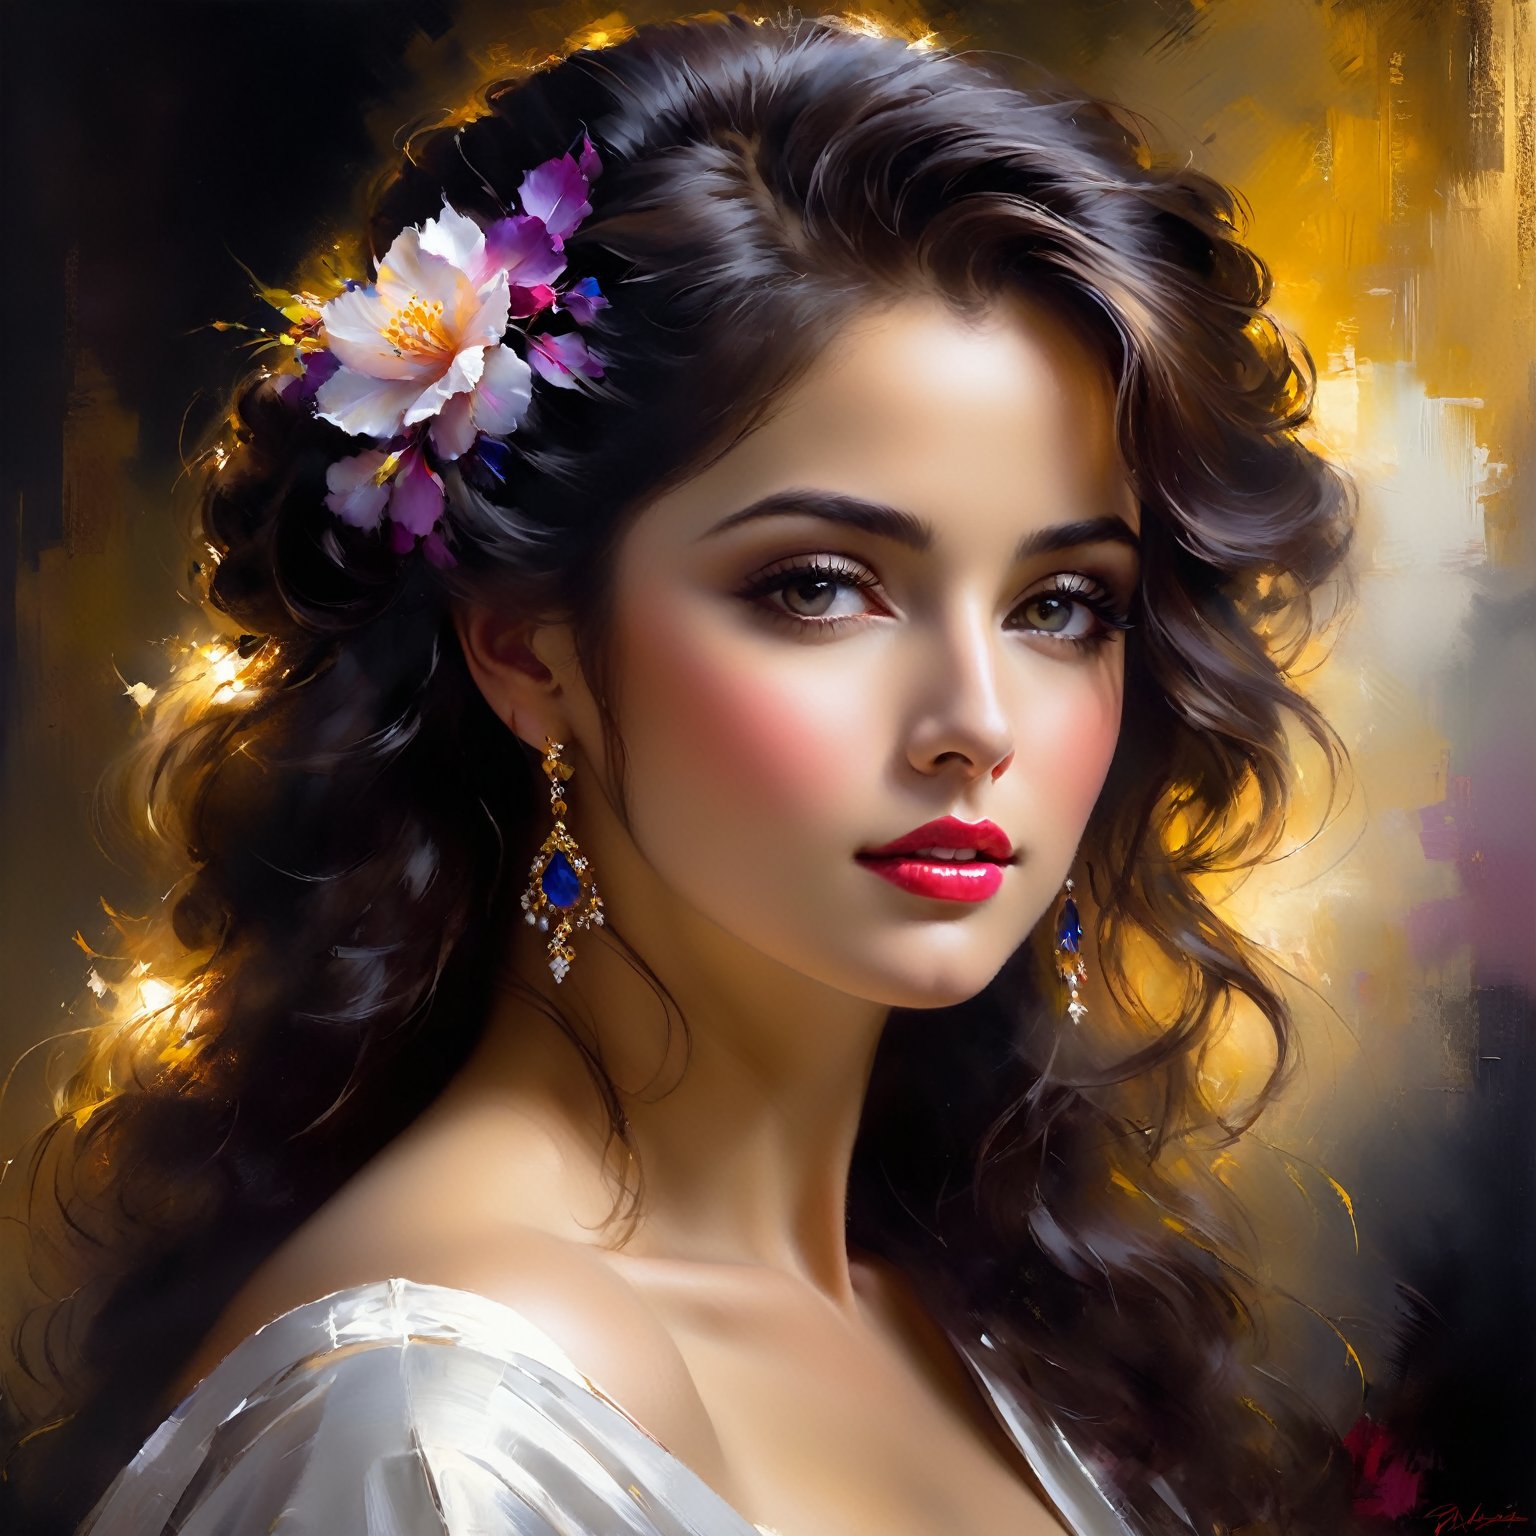 Embracing the exquisite beauty and grace of a woman through the artistry of a painted portrait.A hyper-realistic 32k  digital rendering, 8k,brought to life through the expert brush strokes of Pino Daeni, ultra fine detail in strokes, saturated colors, dramatic lighting, chiaroscuro effect, high contrast, 32k,intrikate,